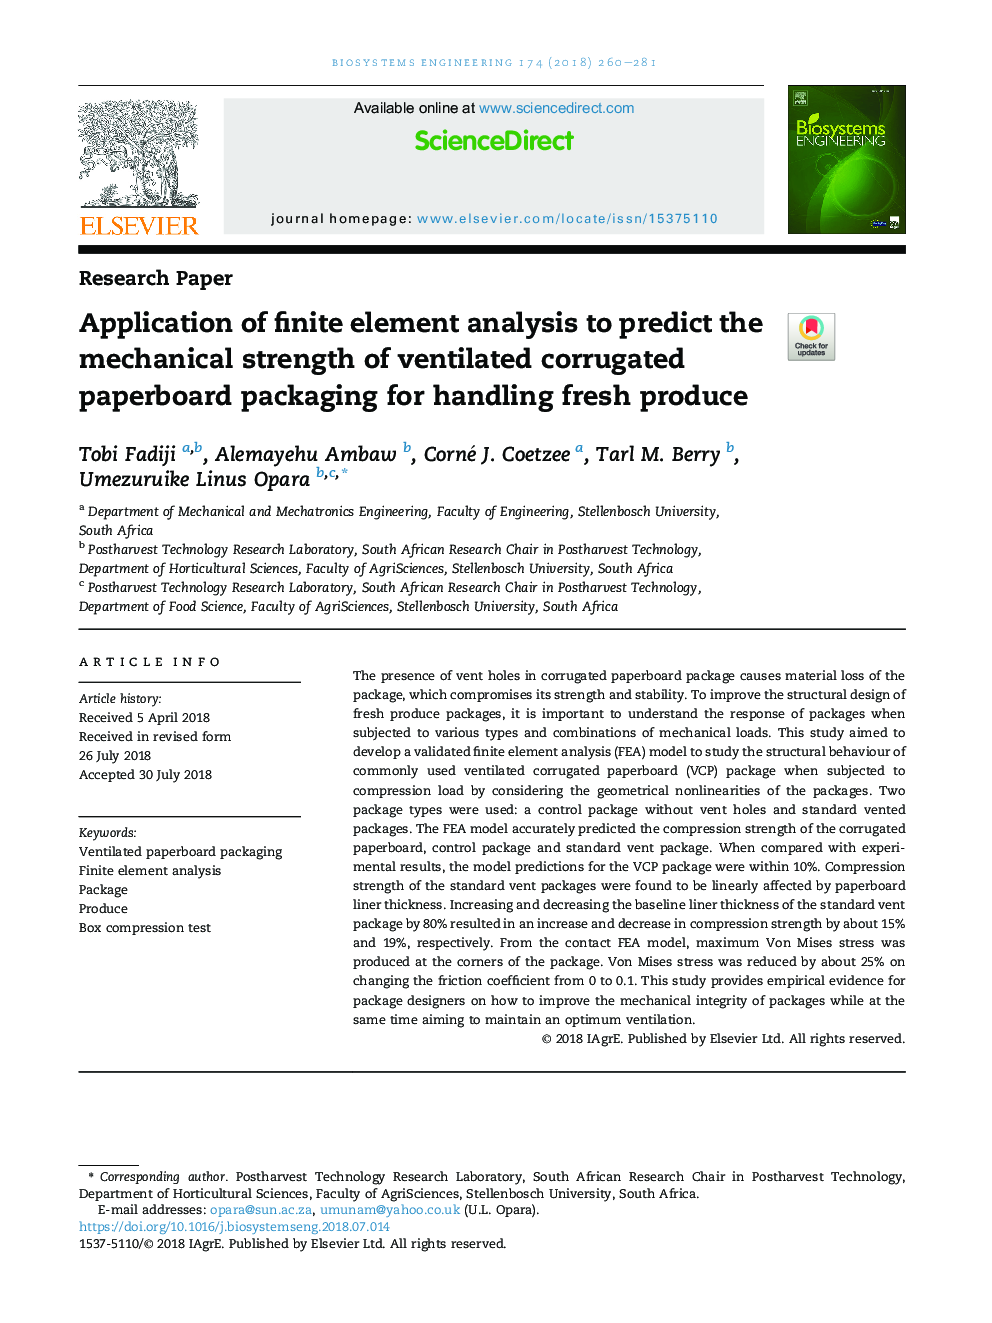 Application of finite element analysis to predict the mechanical strength of ventilated corrugated paperboard packaging for handling fresh produce